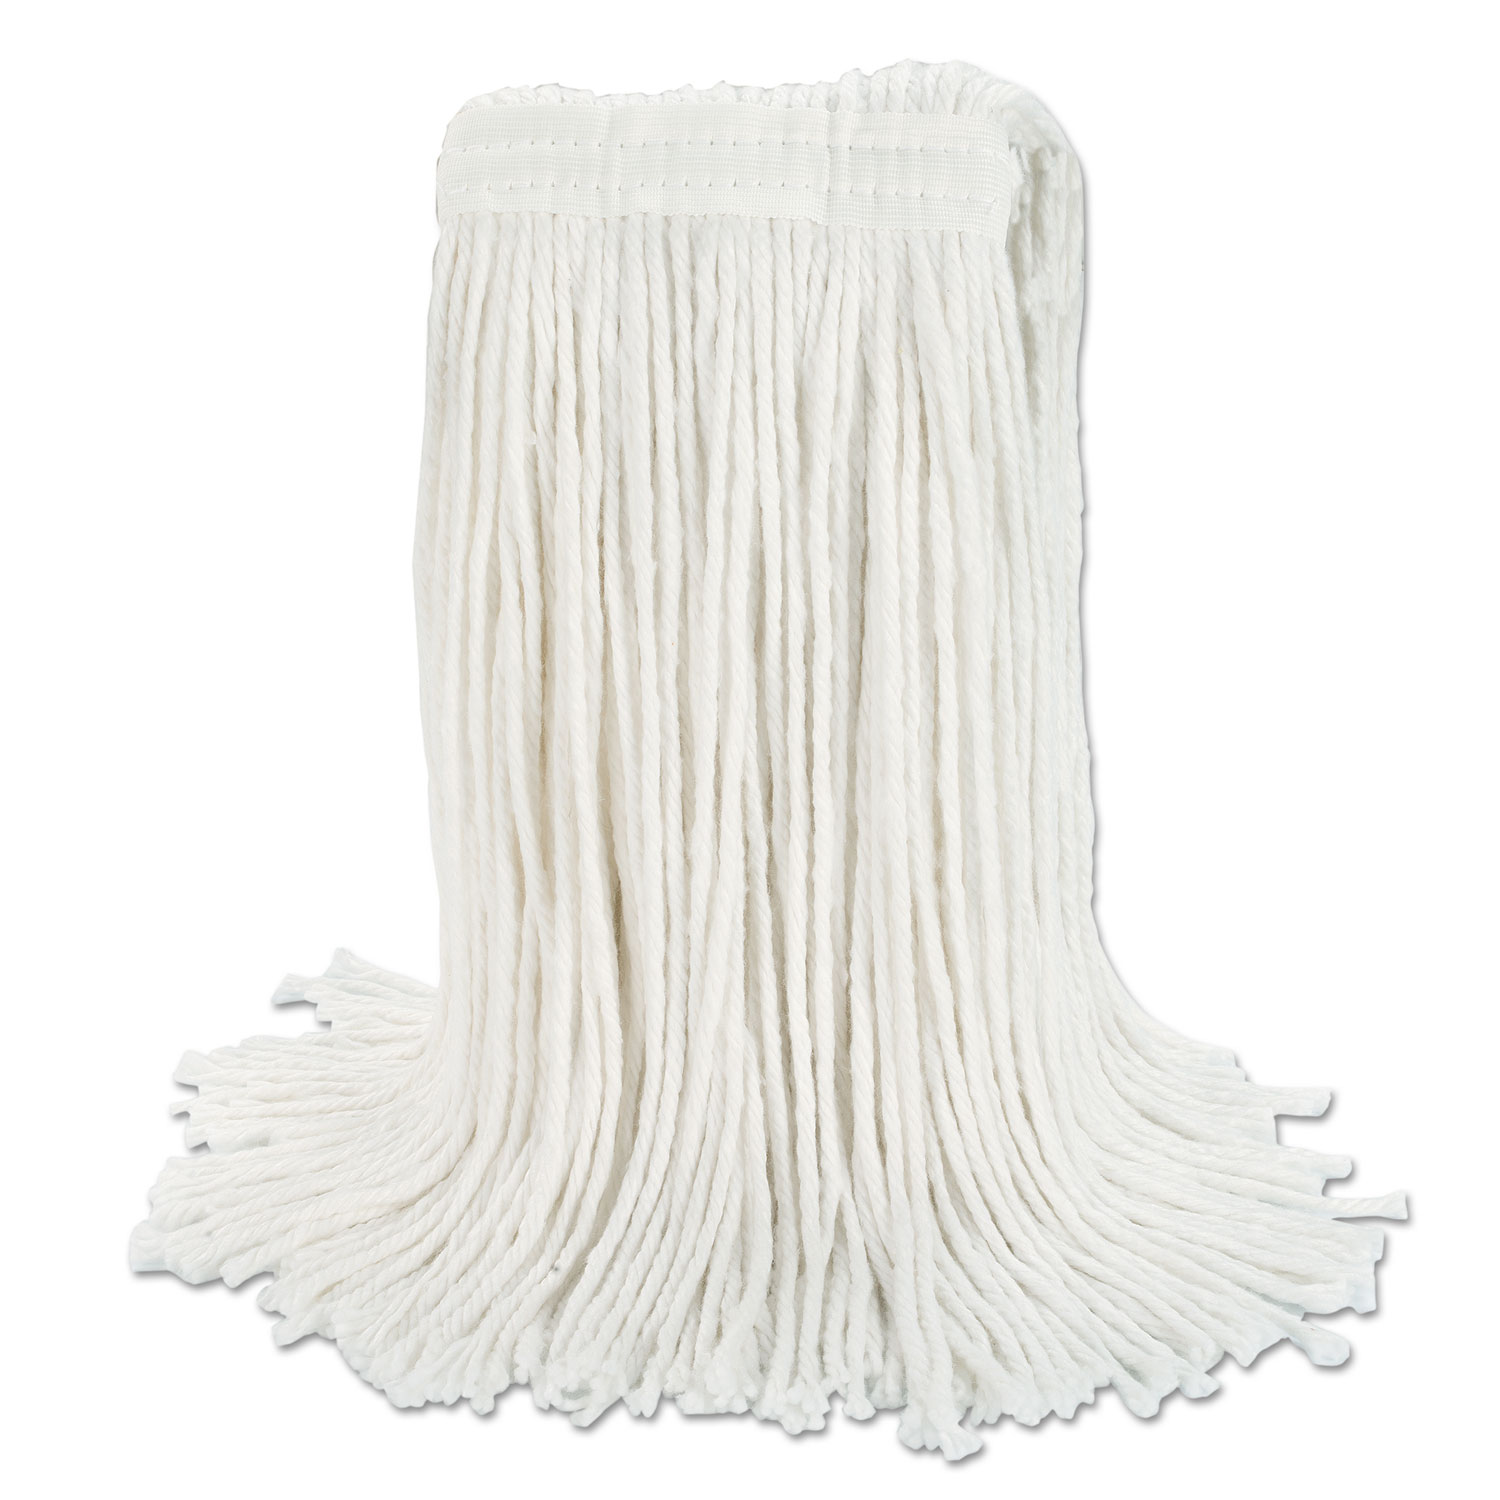 Pack of 12 White 20 oz Rayon UNISAN 2320F Premium Cut-End Wet Mop Heads 